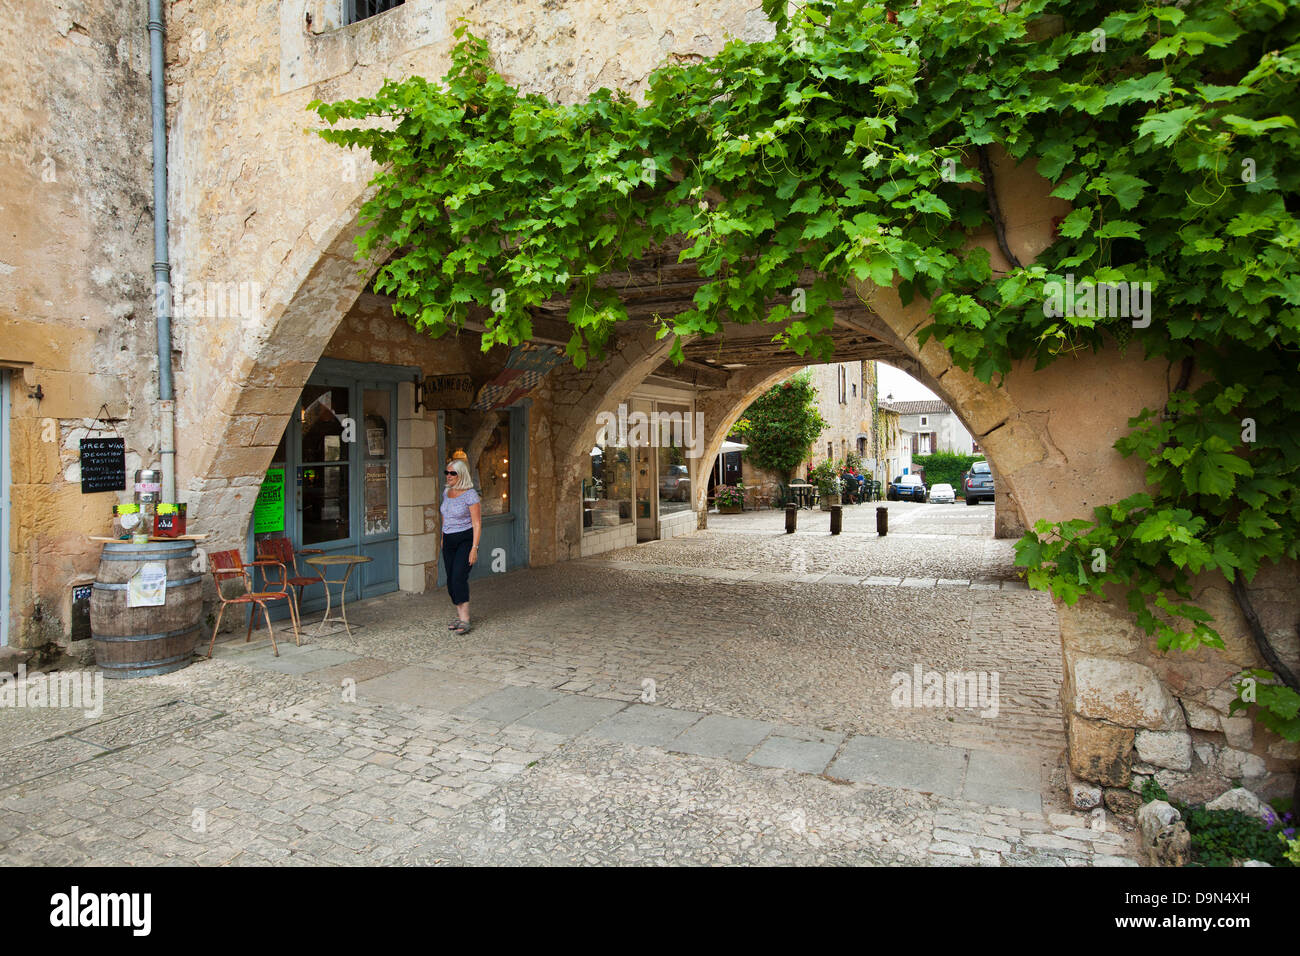 One of the many arches with shops and cafes around the Place des Cornieres in Monpazier, Dordogne, France Stock Photo